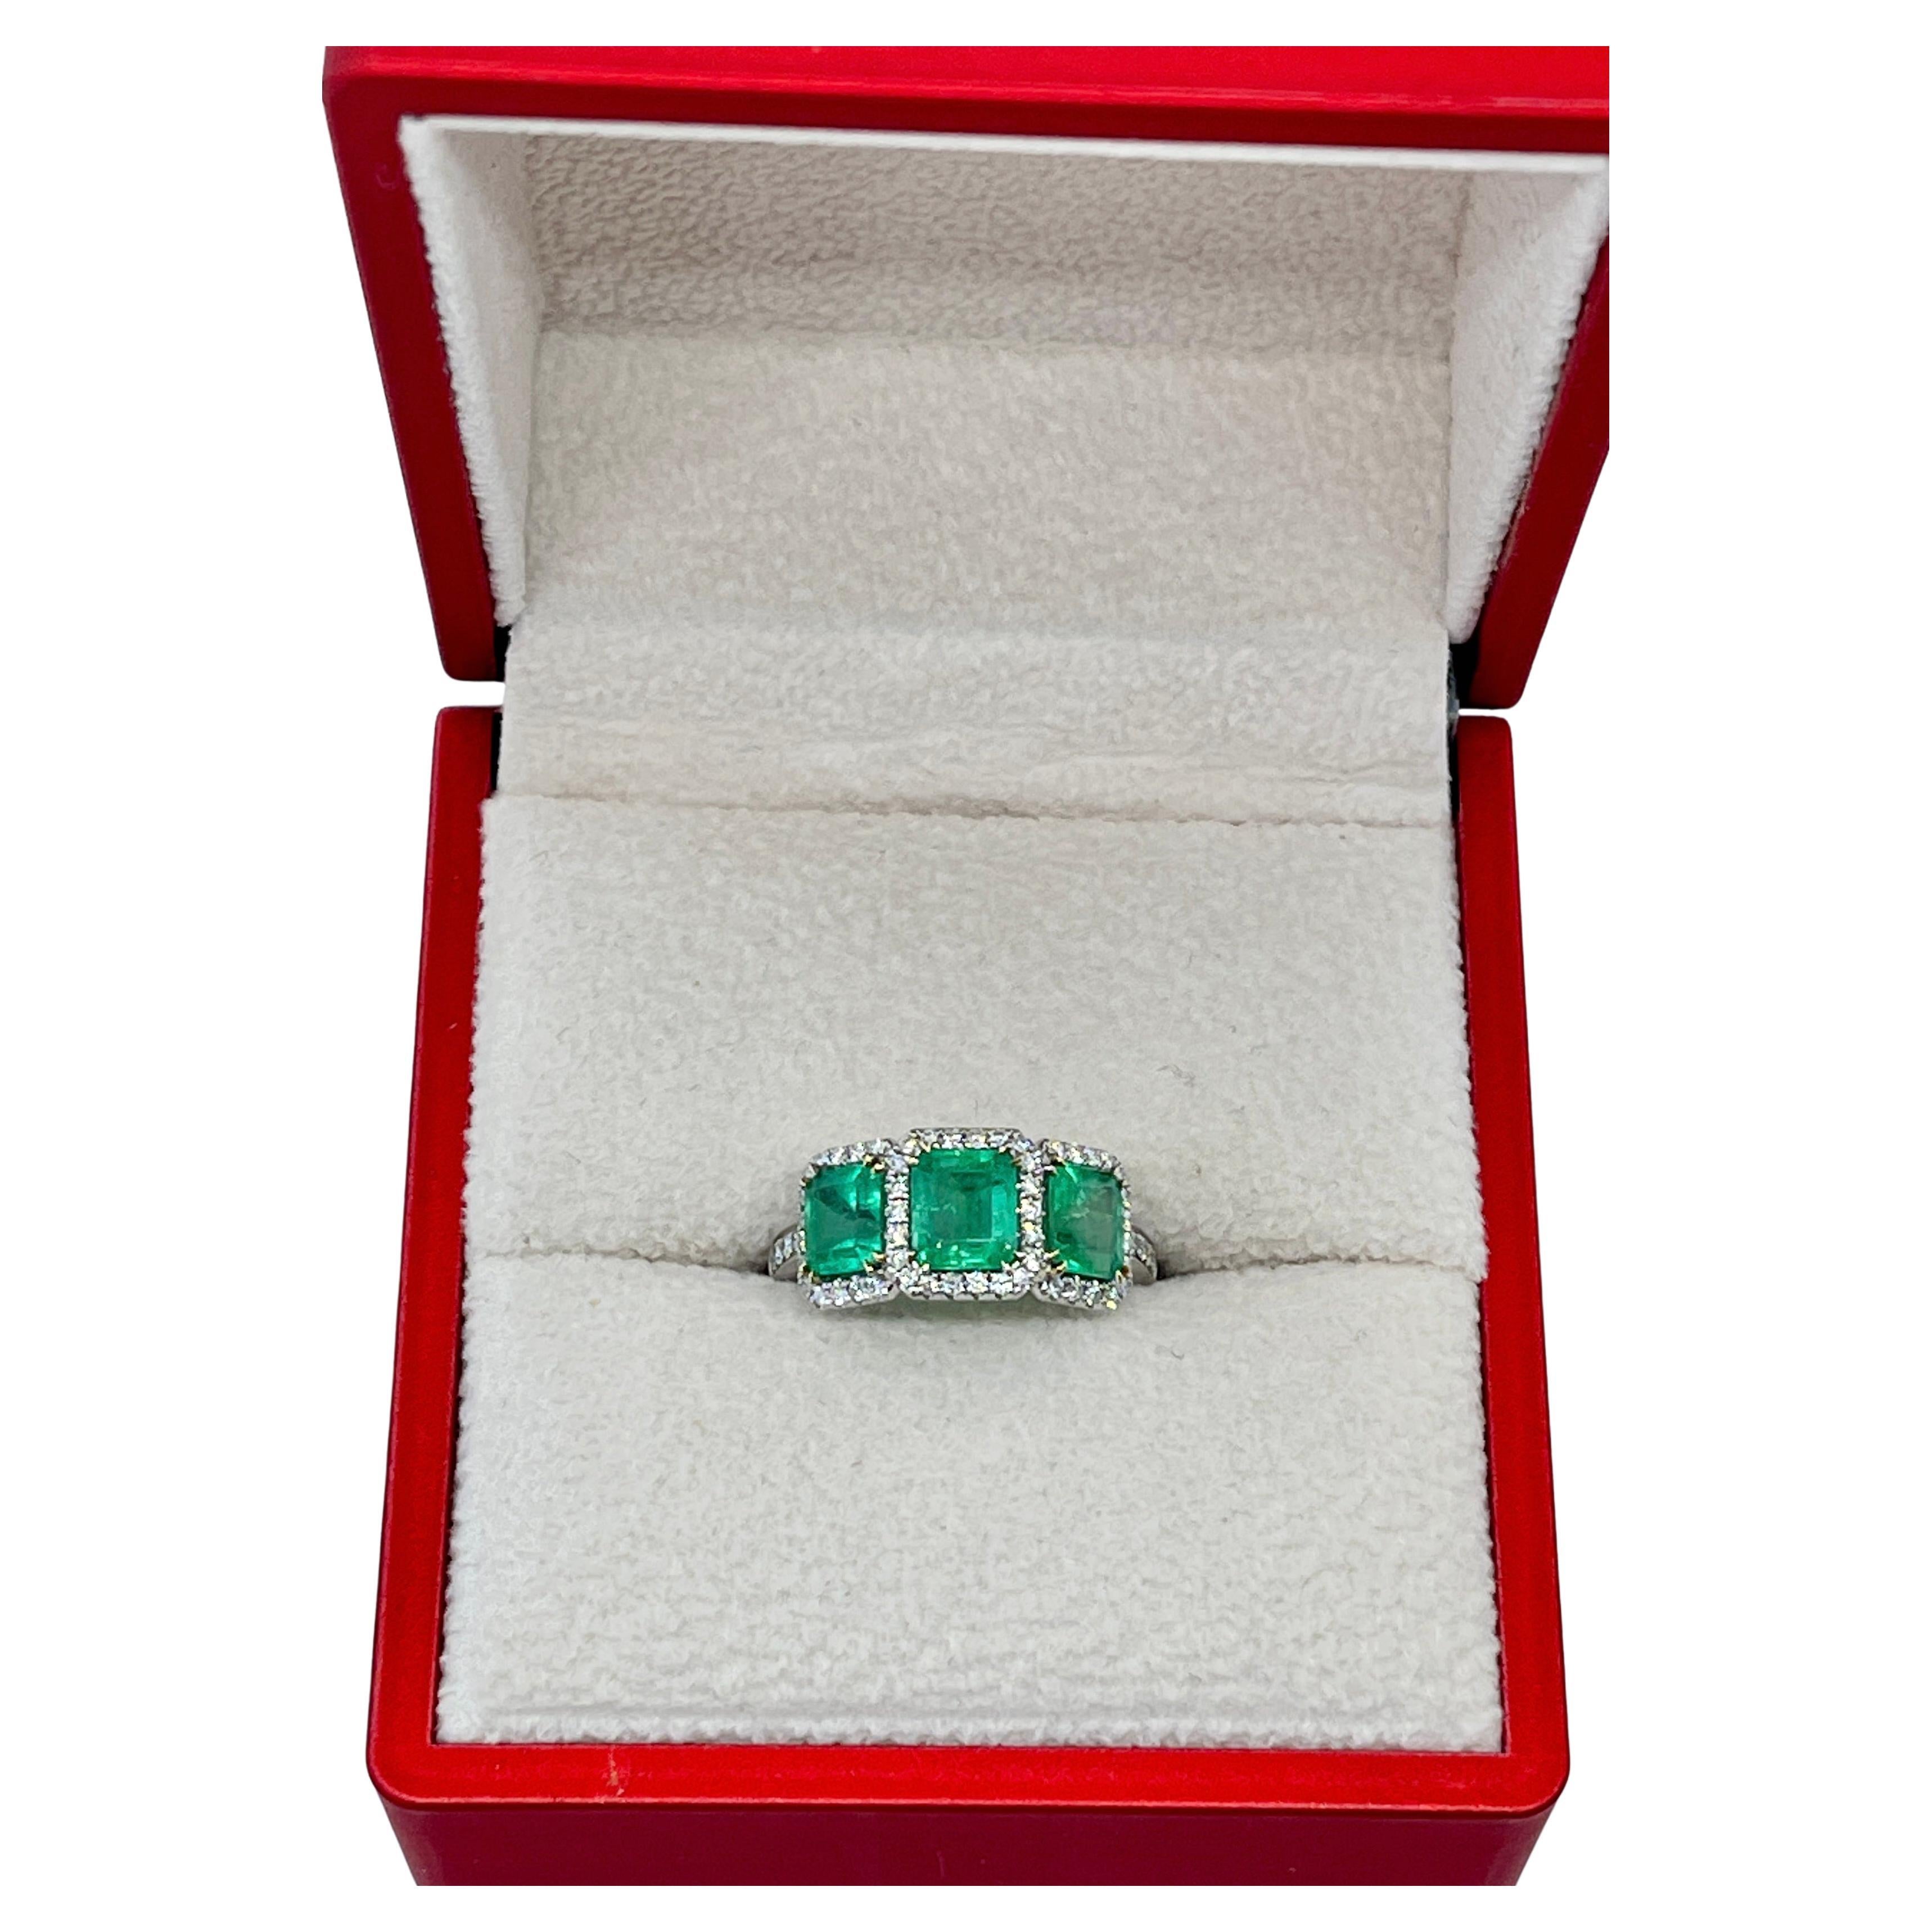 This Magnificent ring features Natural Emeralds Earth Minded from Colombia.

The centrepiece are the 3 x Vivid Green, Natural Colombian Emeralds which together weigh a total of 2.13 carats. Honestly, the photos cannot do this ring justice. The